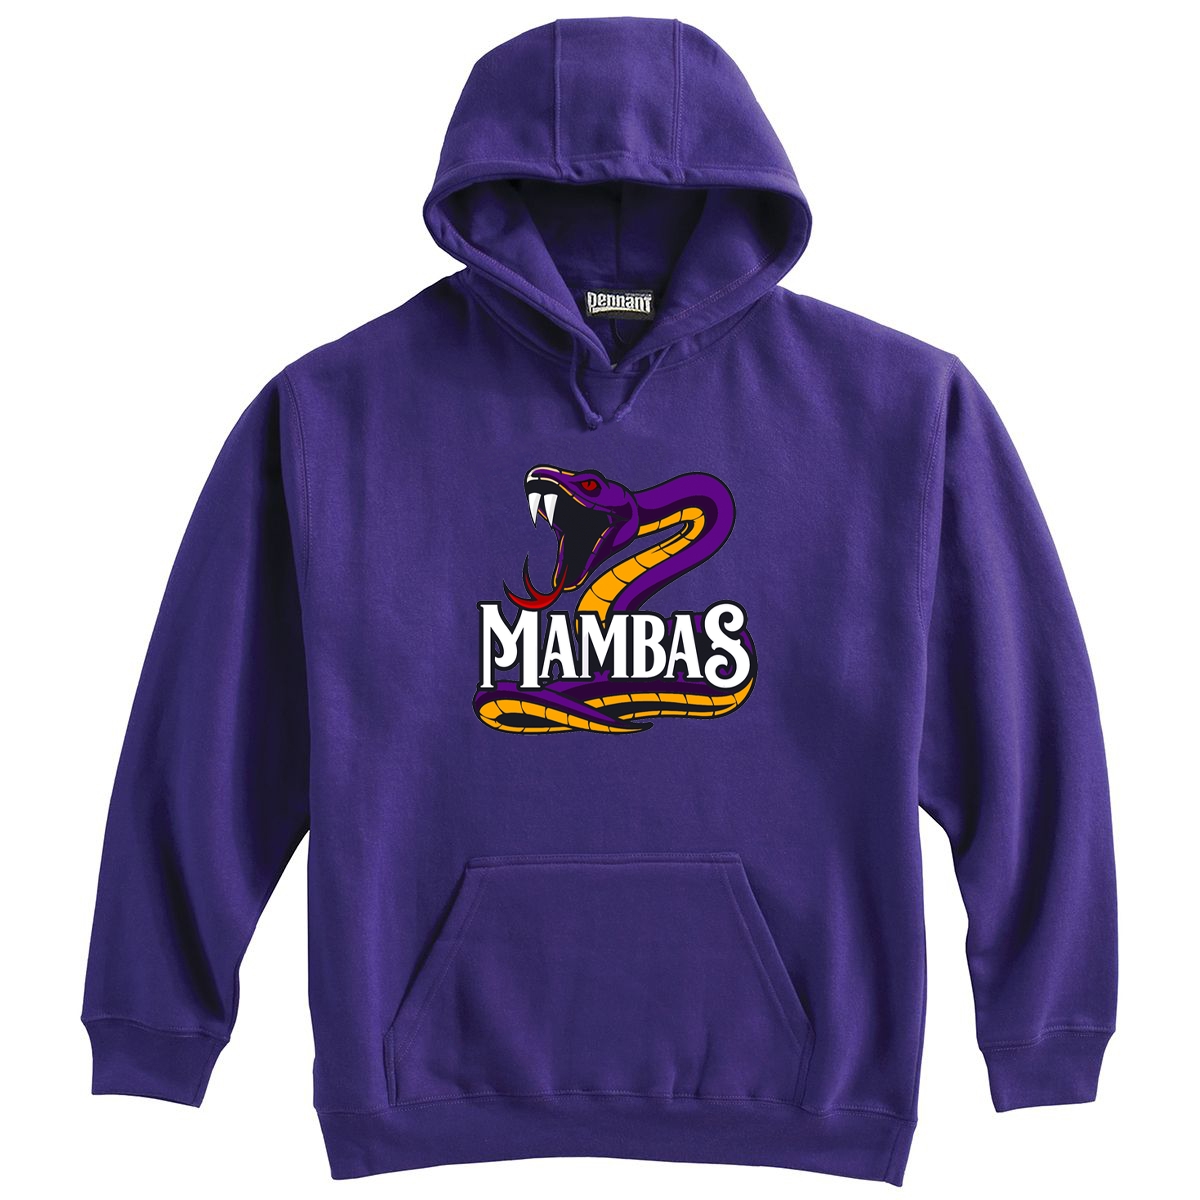 Mambas Basketball Sweatshirt (Available in Youth Sizes)